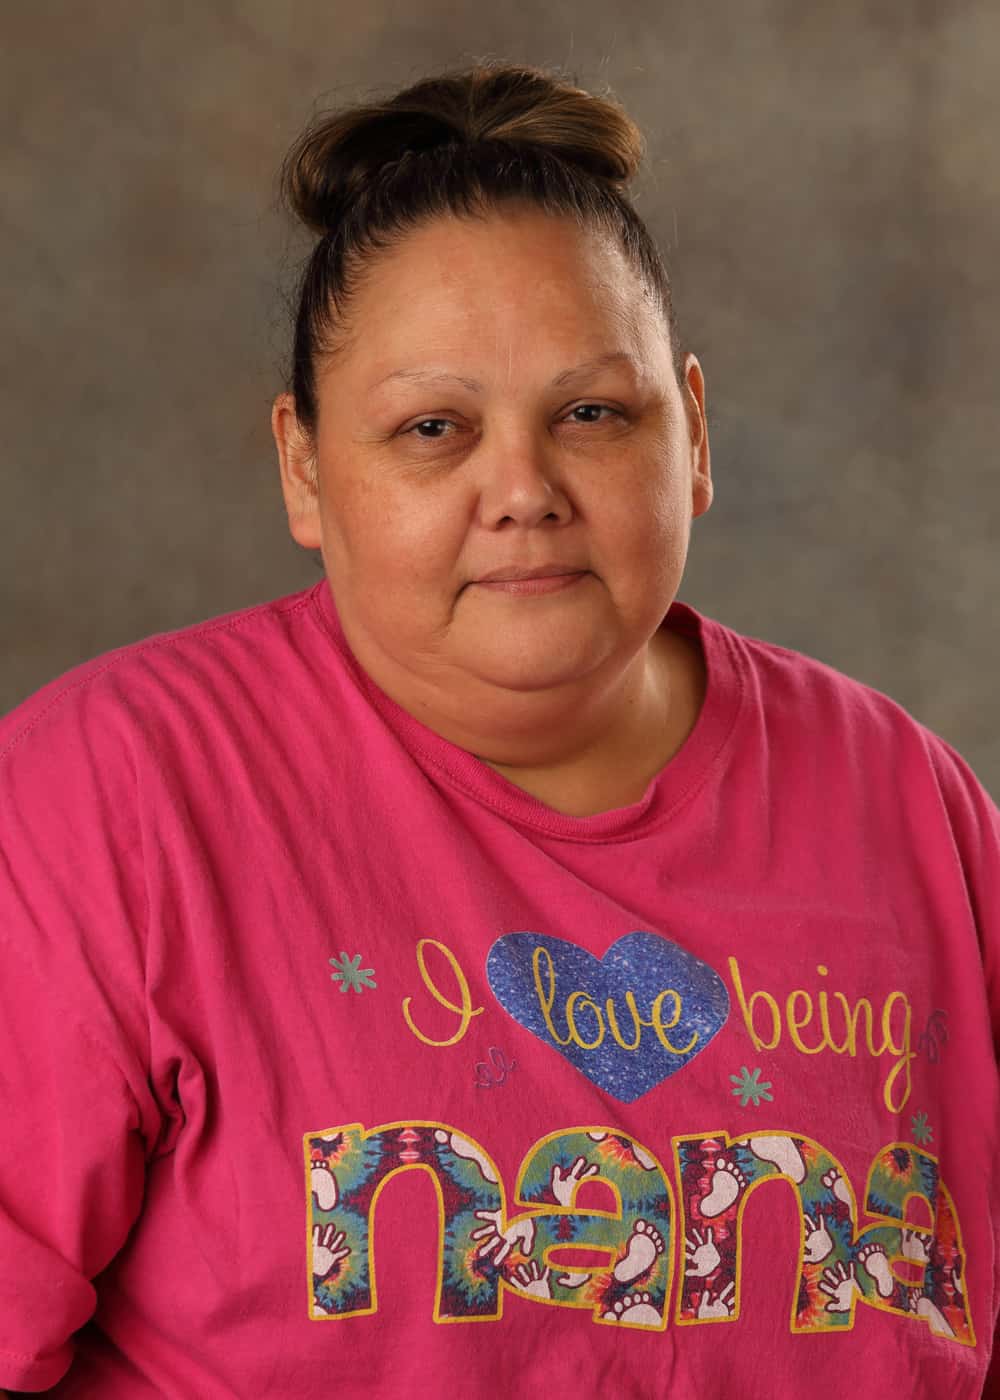 Photo of Kitchen Assistant Sara Callahan. She is a Caucasian woman with dark hair in a bun, and dark eyes. She is wearing a pink T-shirt that reads I love being Nana.